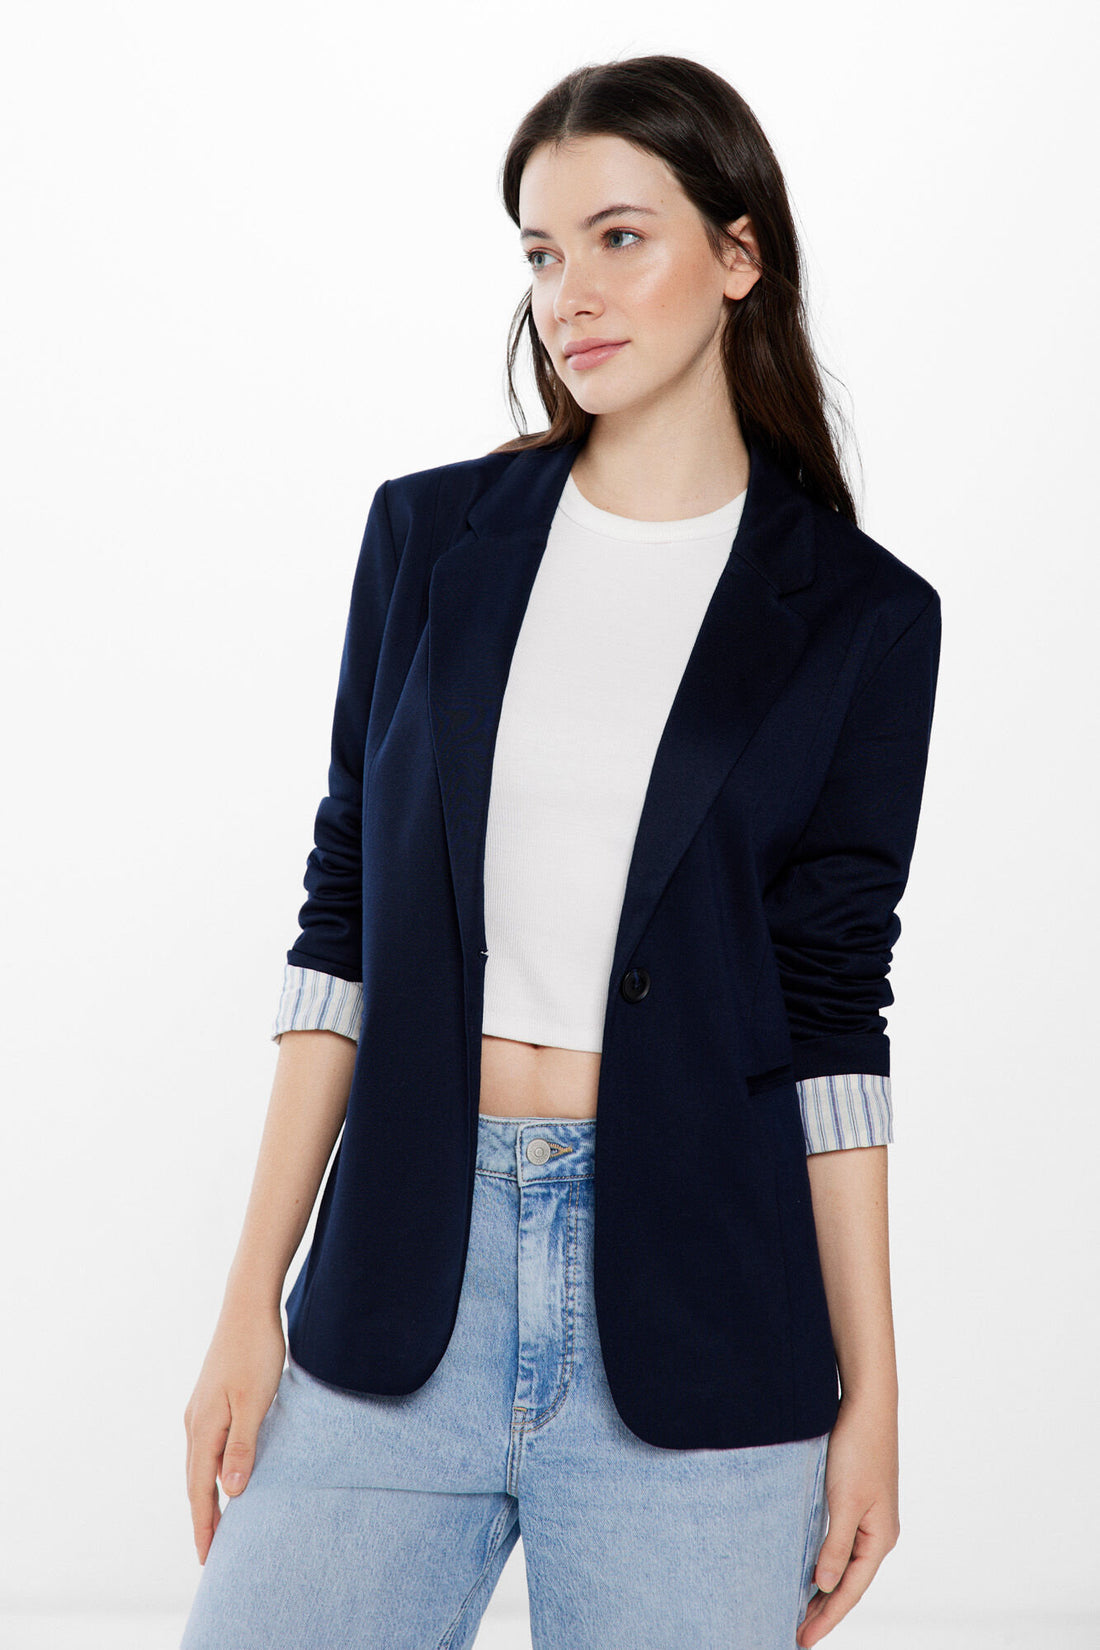 Blazer With Rolled Sleeves_8417373_14_01